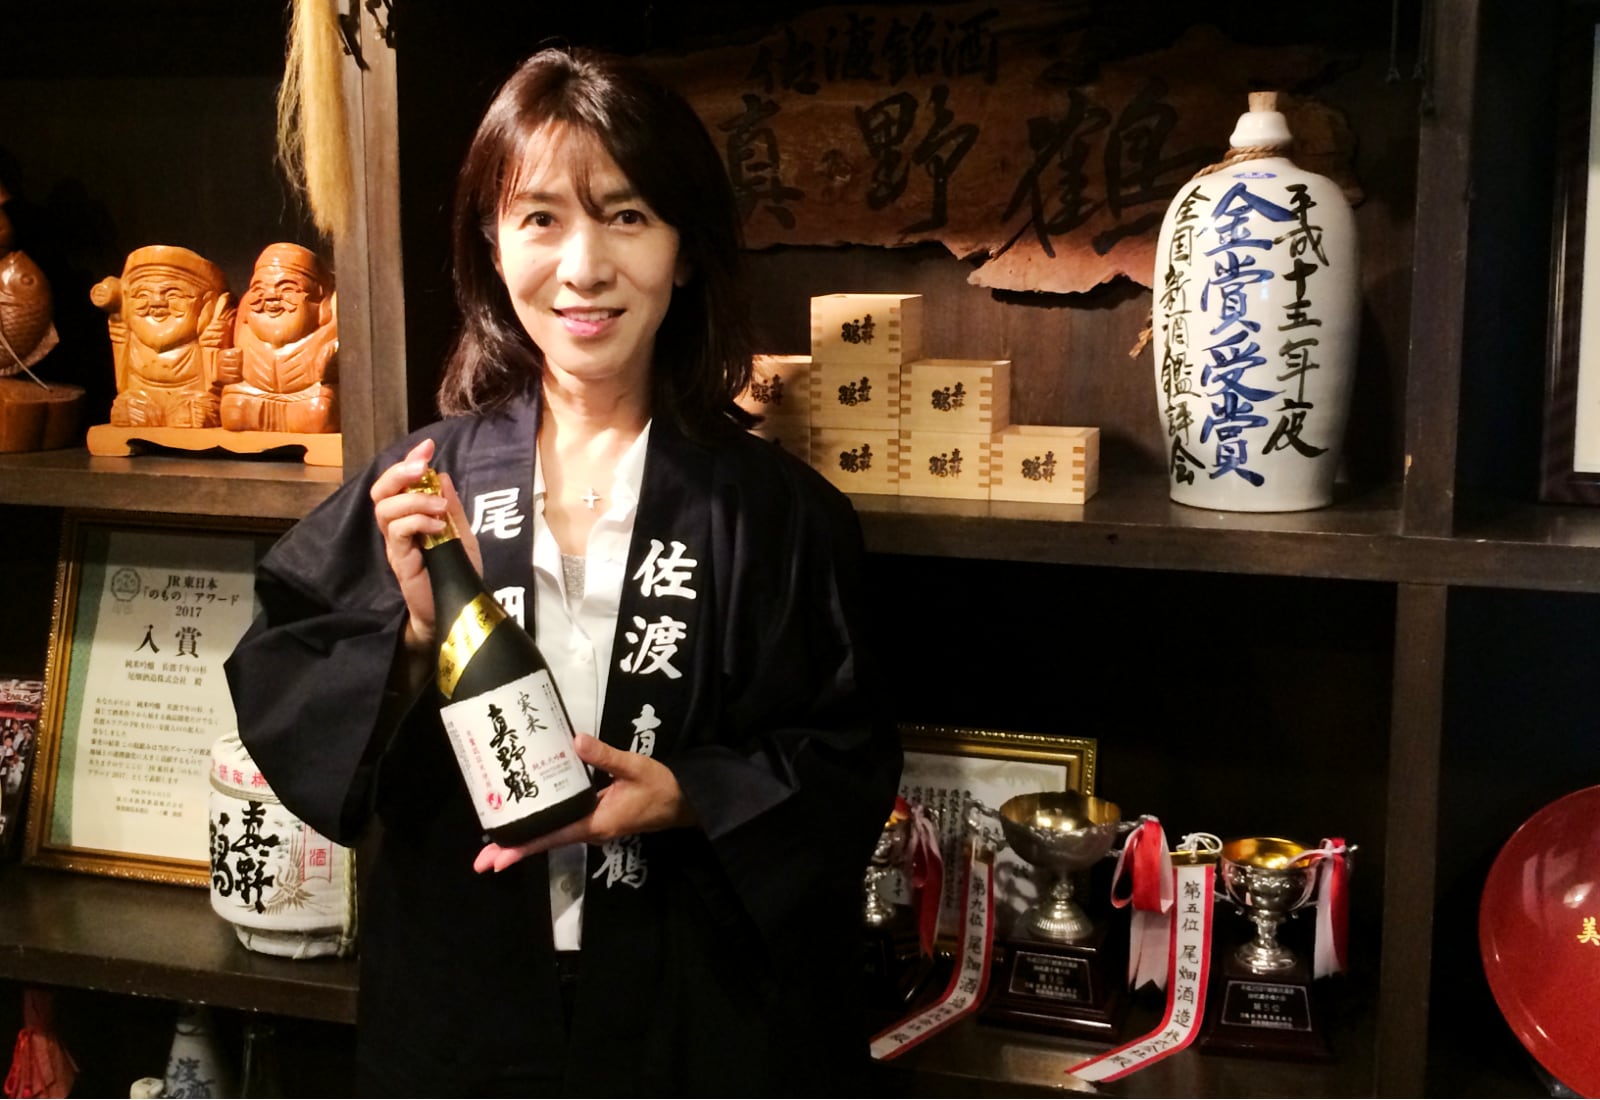 A Marriage of Sake, Trust, and Ecology: Rumiko Obata and Her Family Brewery